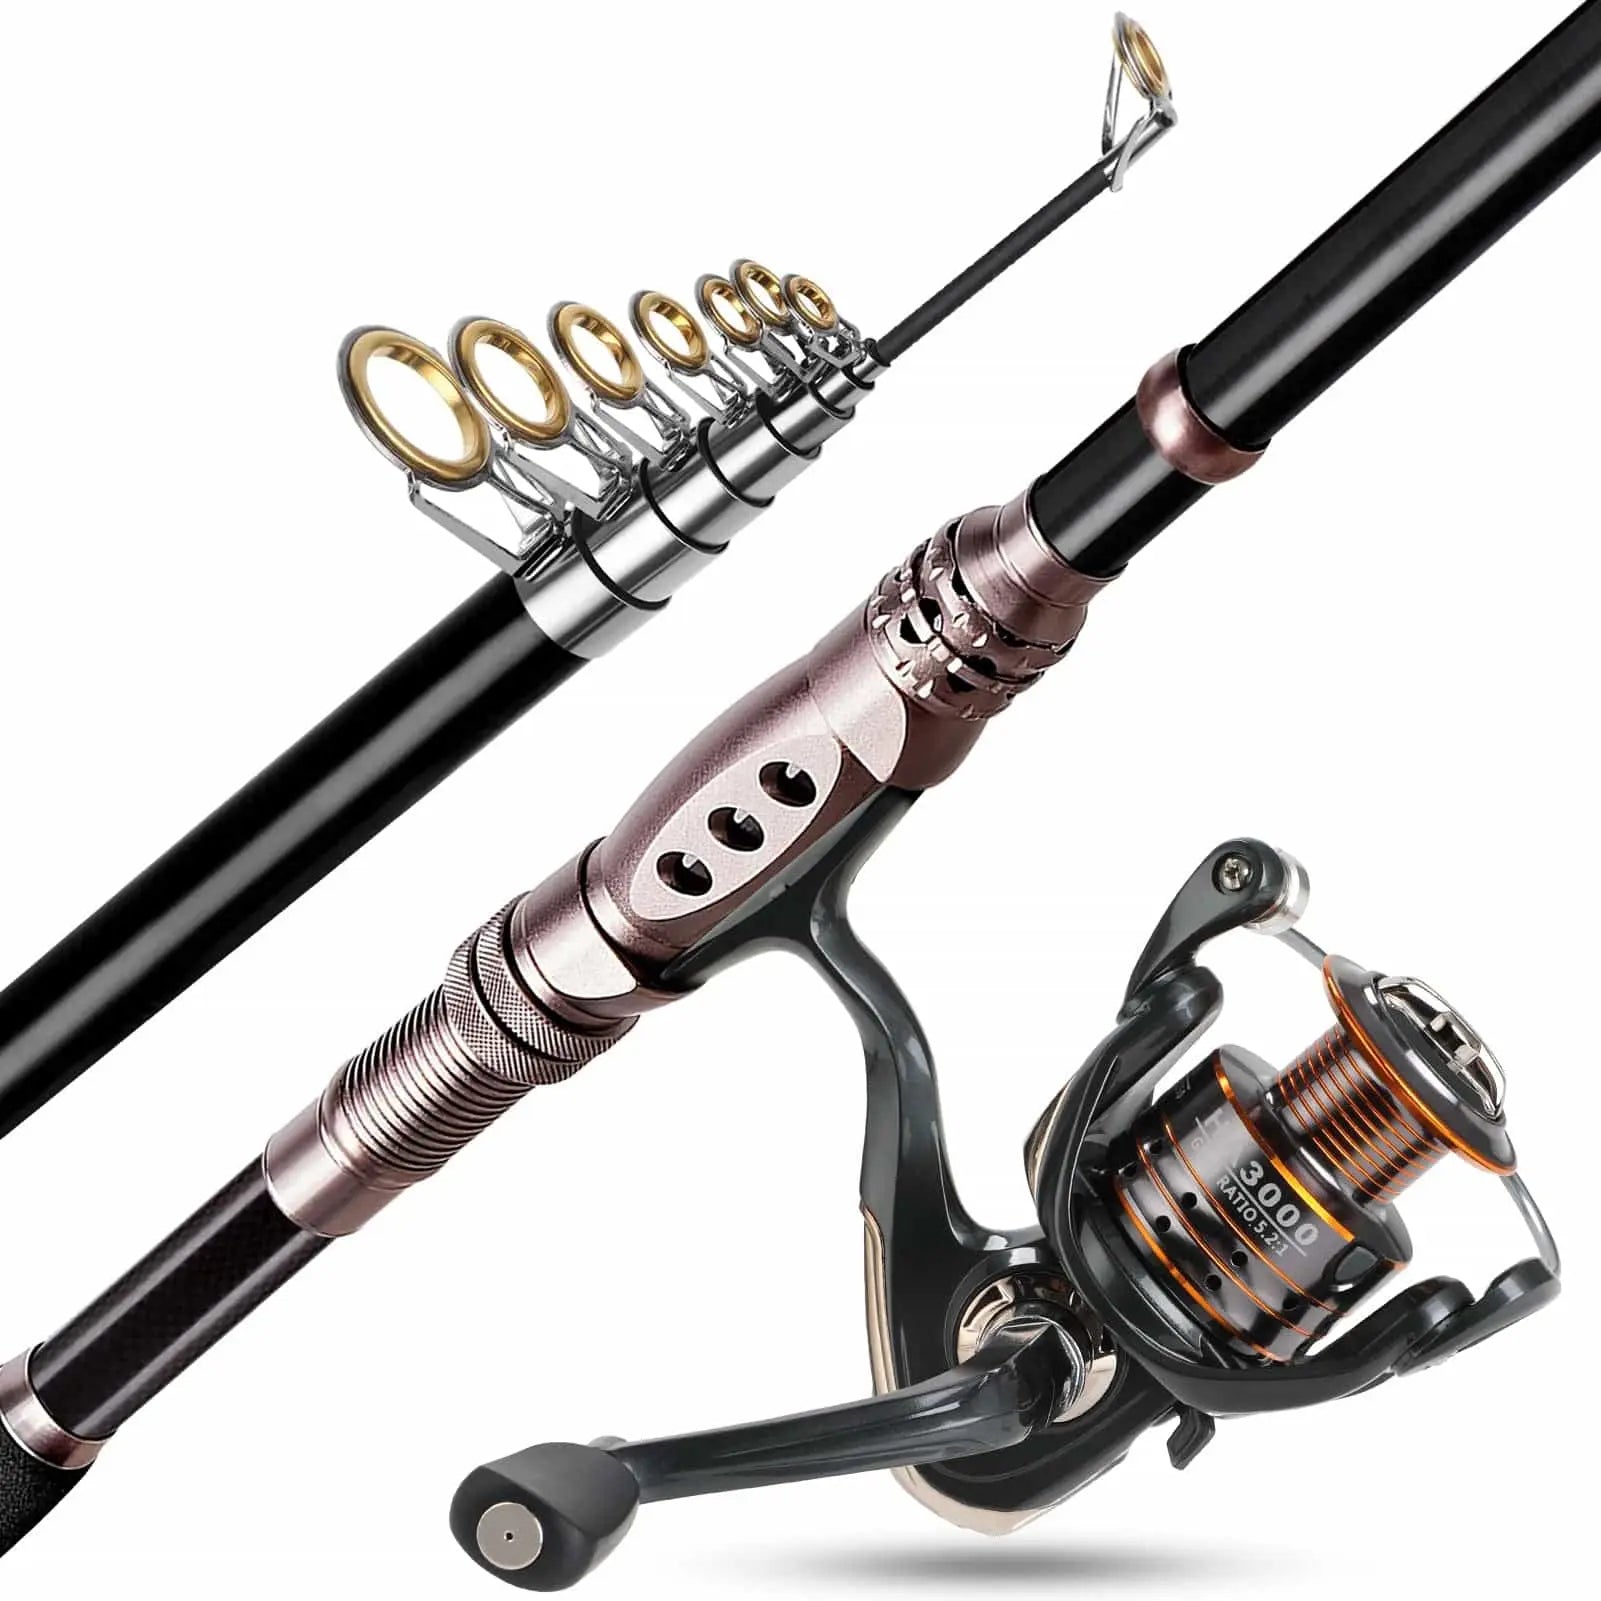 PLUSINNO Telescopic Fishing Rod and Reel Combos Full Kit, Carbon Fiber  Fishing Pole, 12 +1 Shielded Bearings Stainless Steel BB Spinning Reel